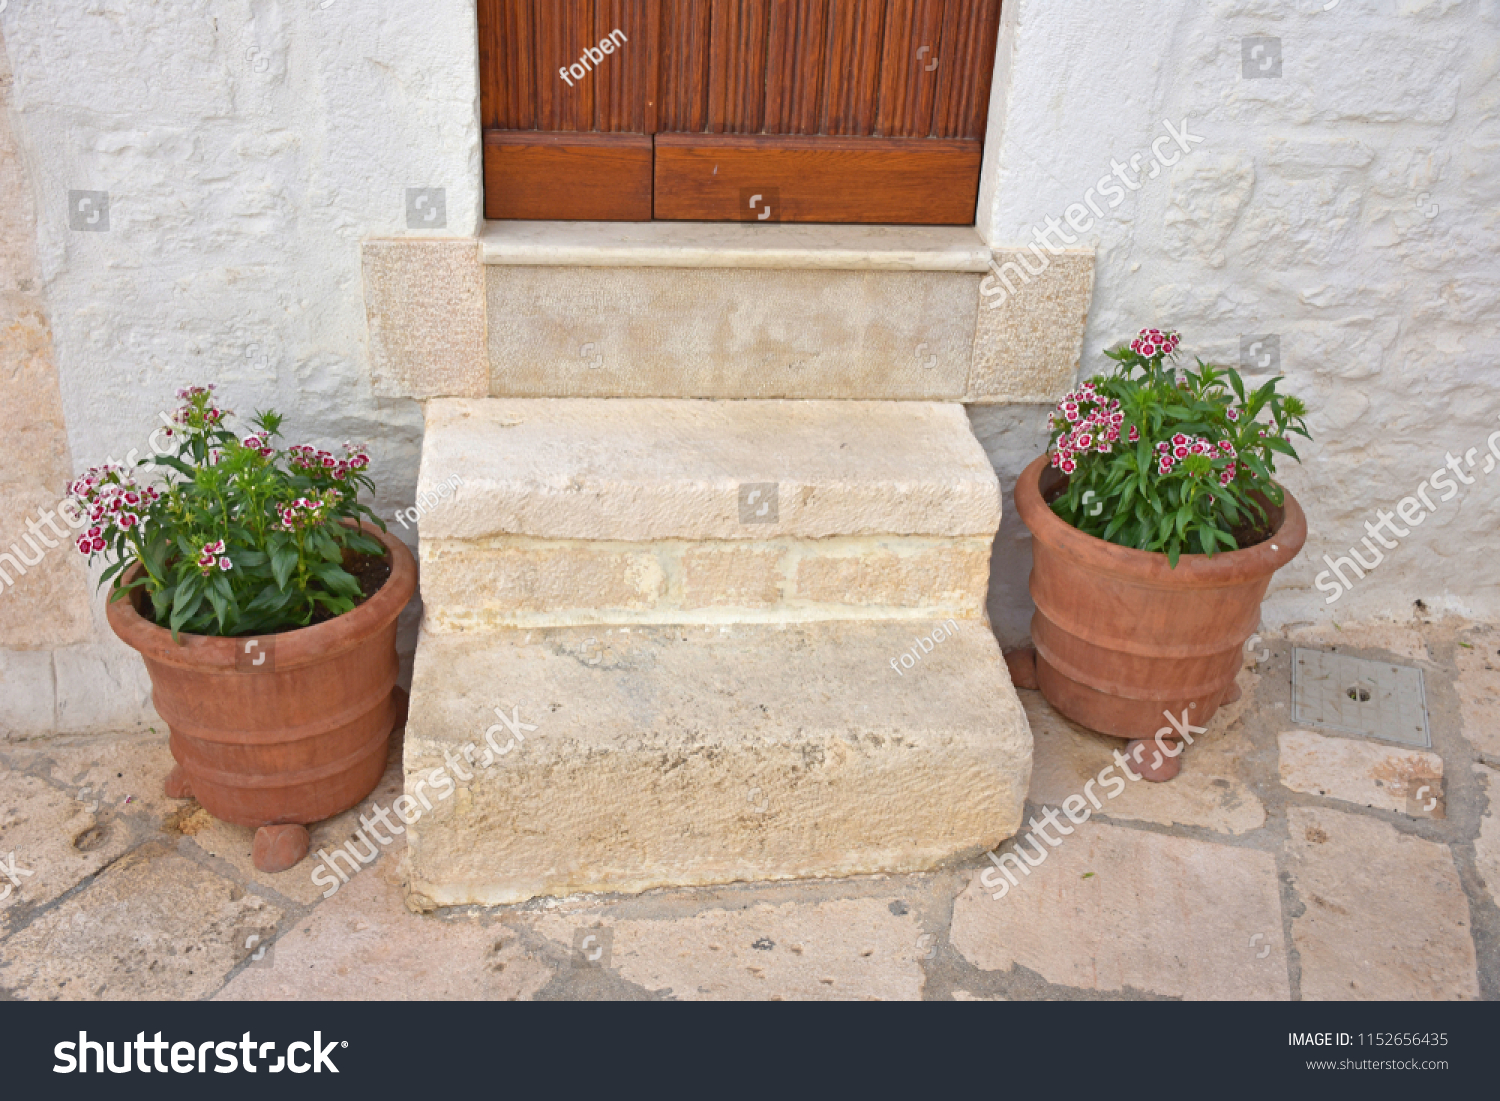 Italy, Puglia region, Locorotondo, 1 May 2018, a whitewashed village in the Itria valley, with its medieval historical center full of stairs, balconies, flowers, arches, frescoed churches, and details #1152656435